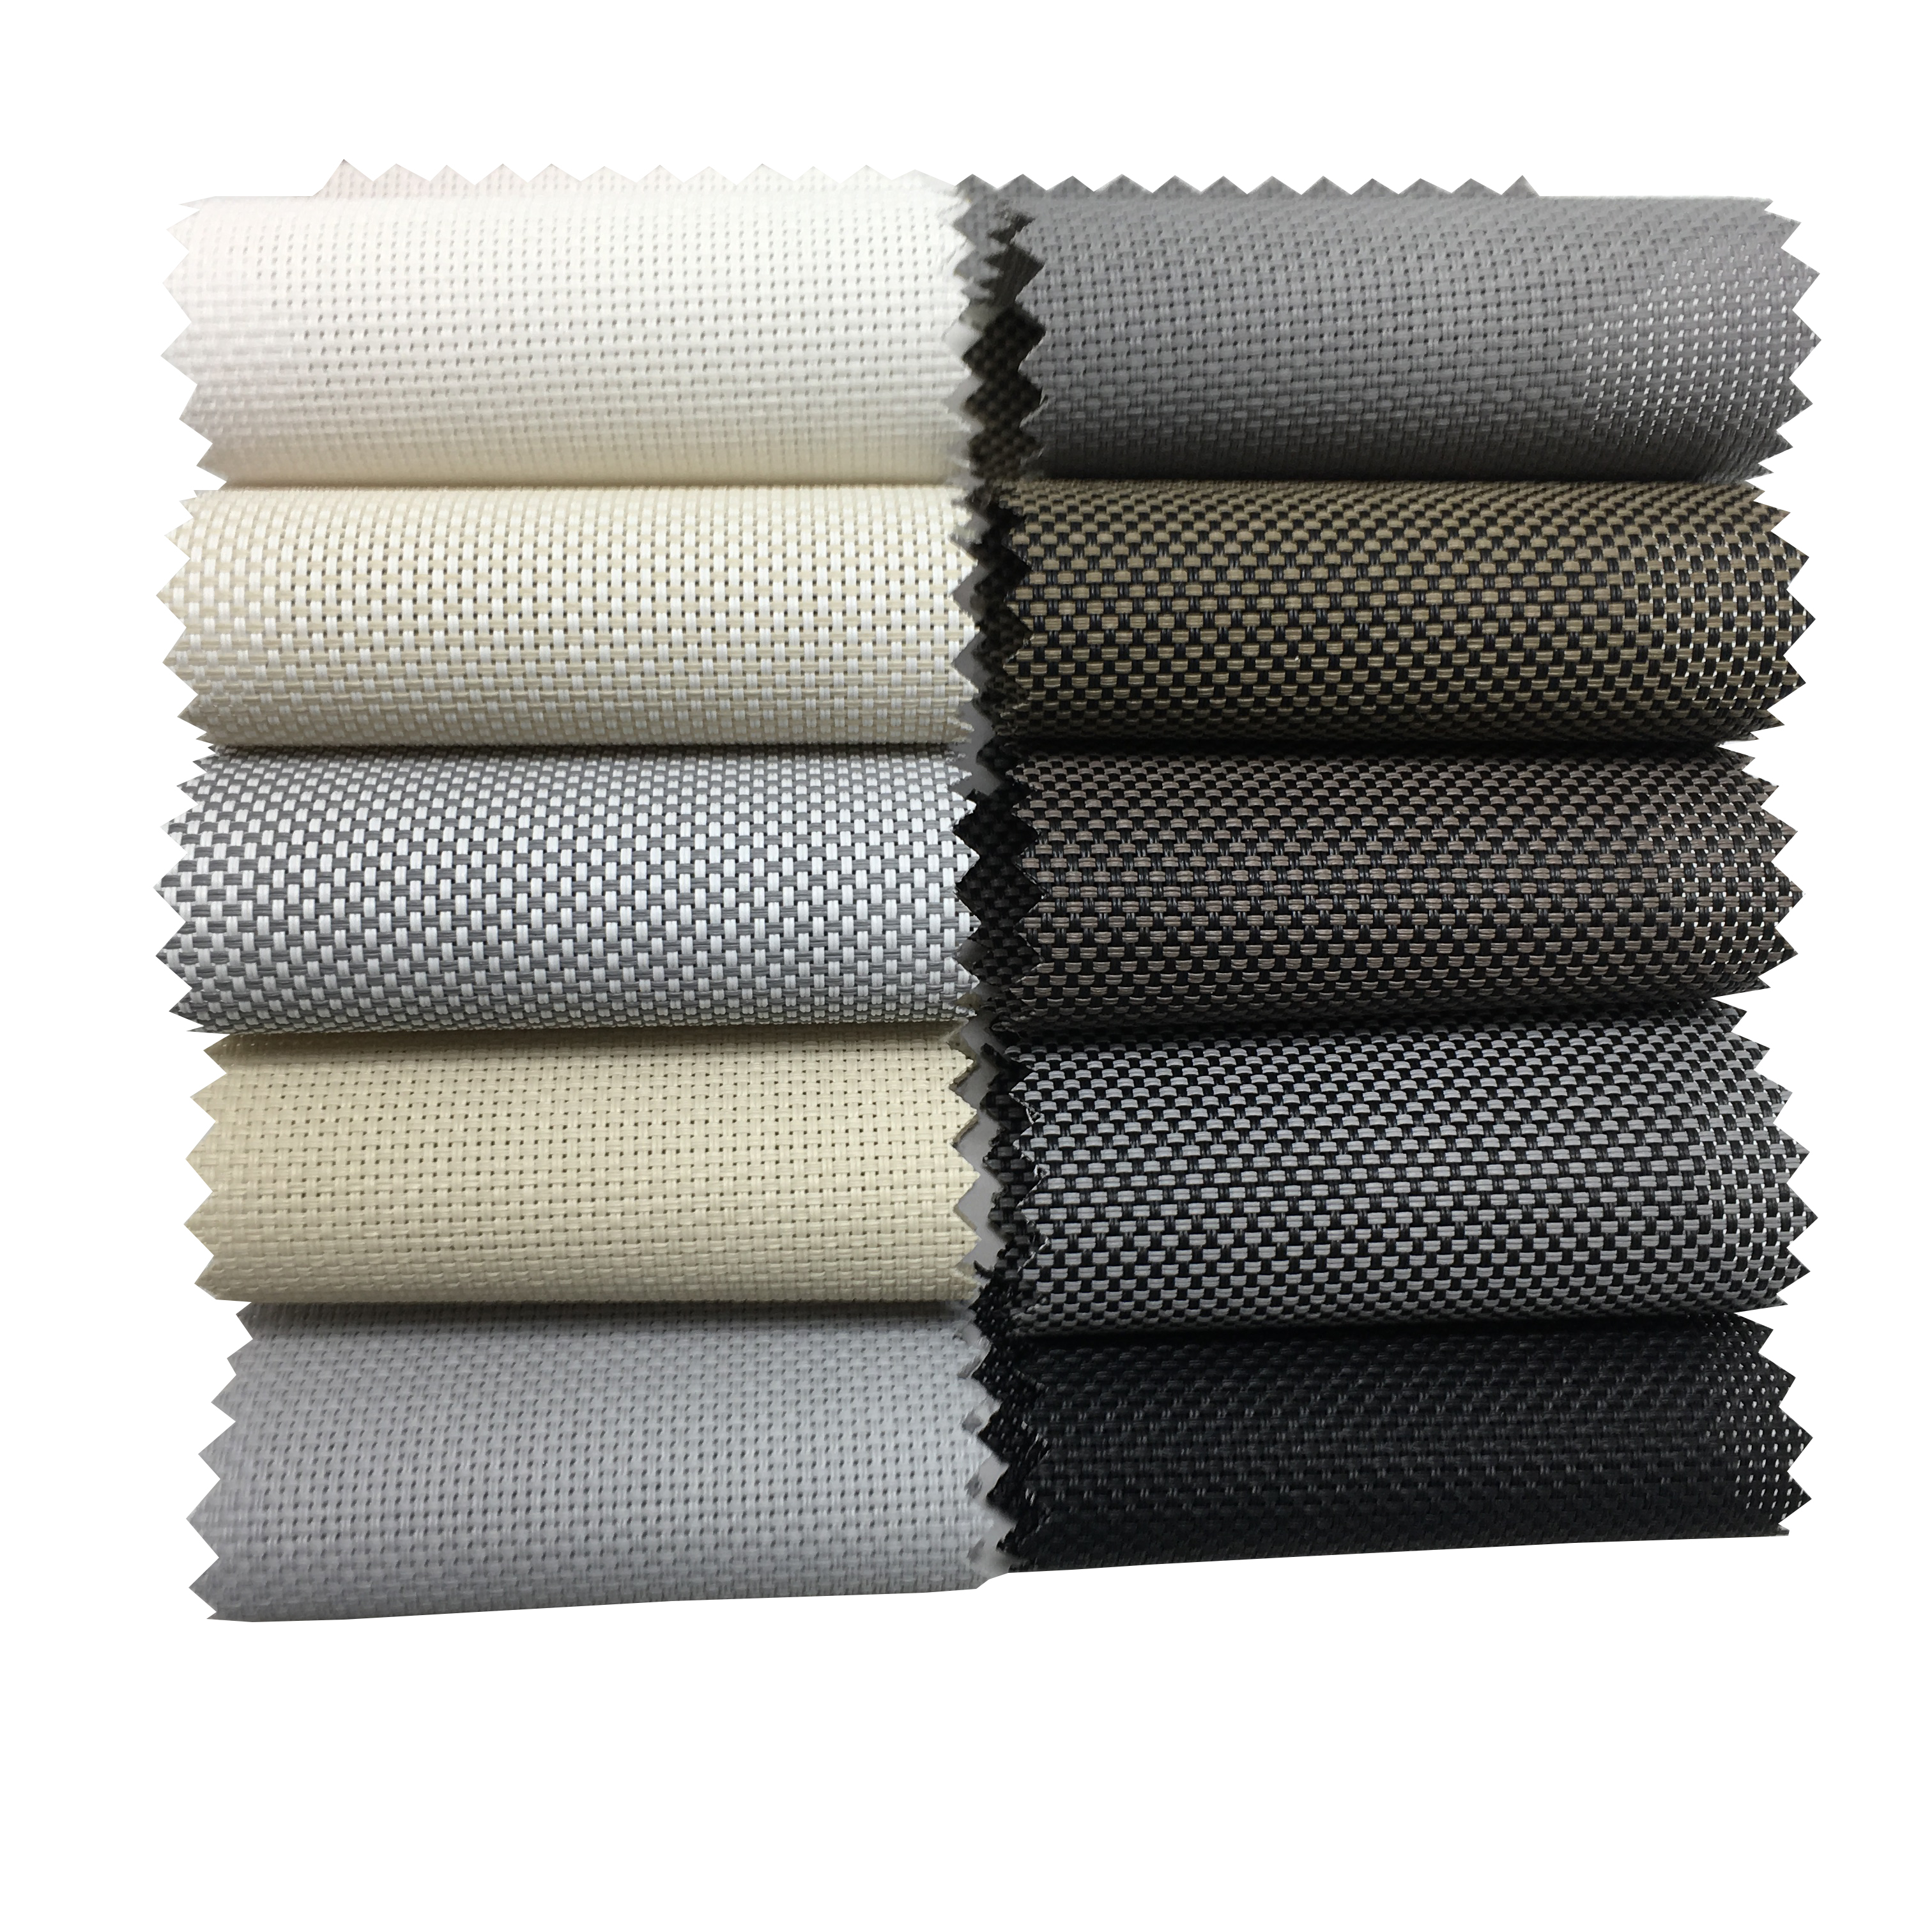 Why Choose Sunscreen Fabrics For Motorized Ceiling Blinds And Motorized Roller Blinds?